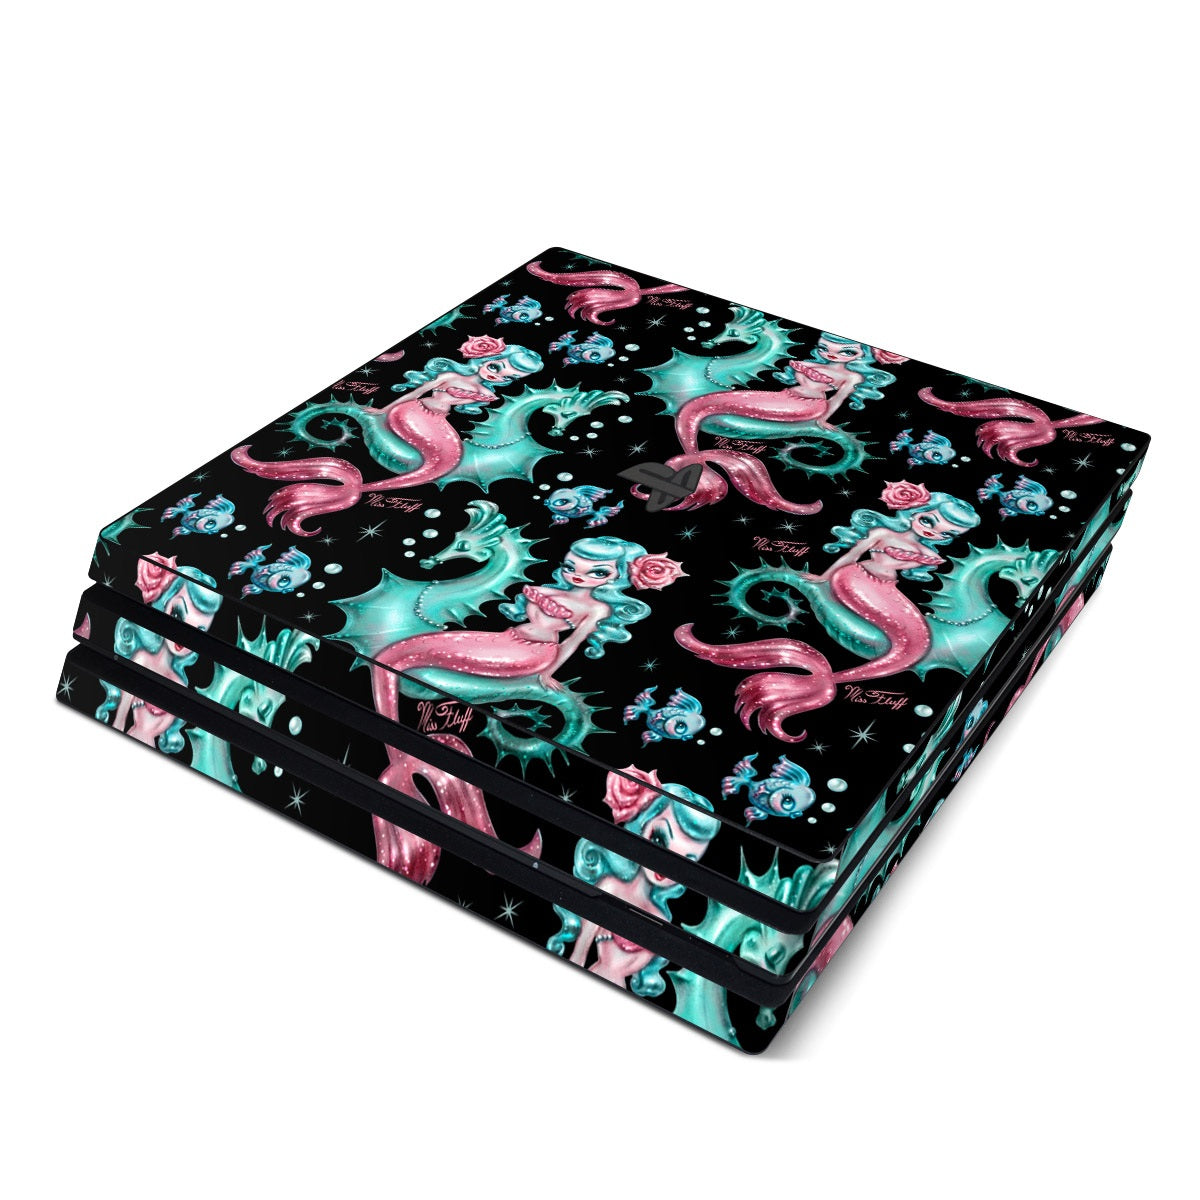 Mysterious Mermaids - Sony PS4 Pro Skin